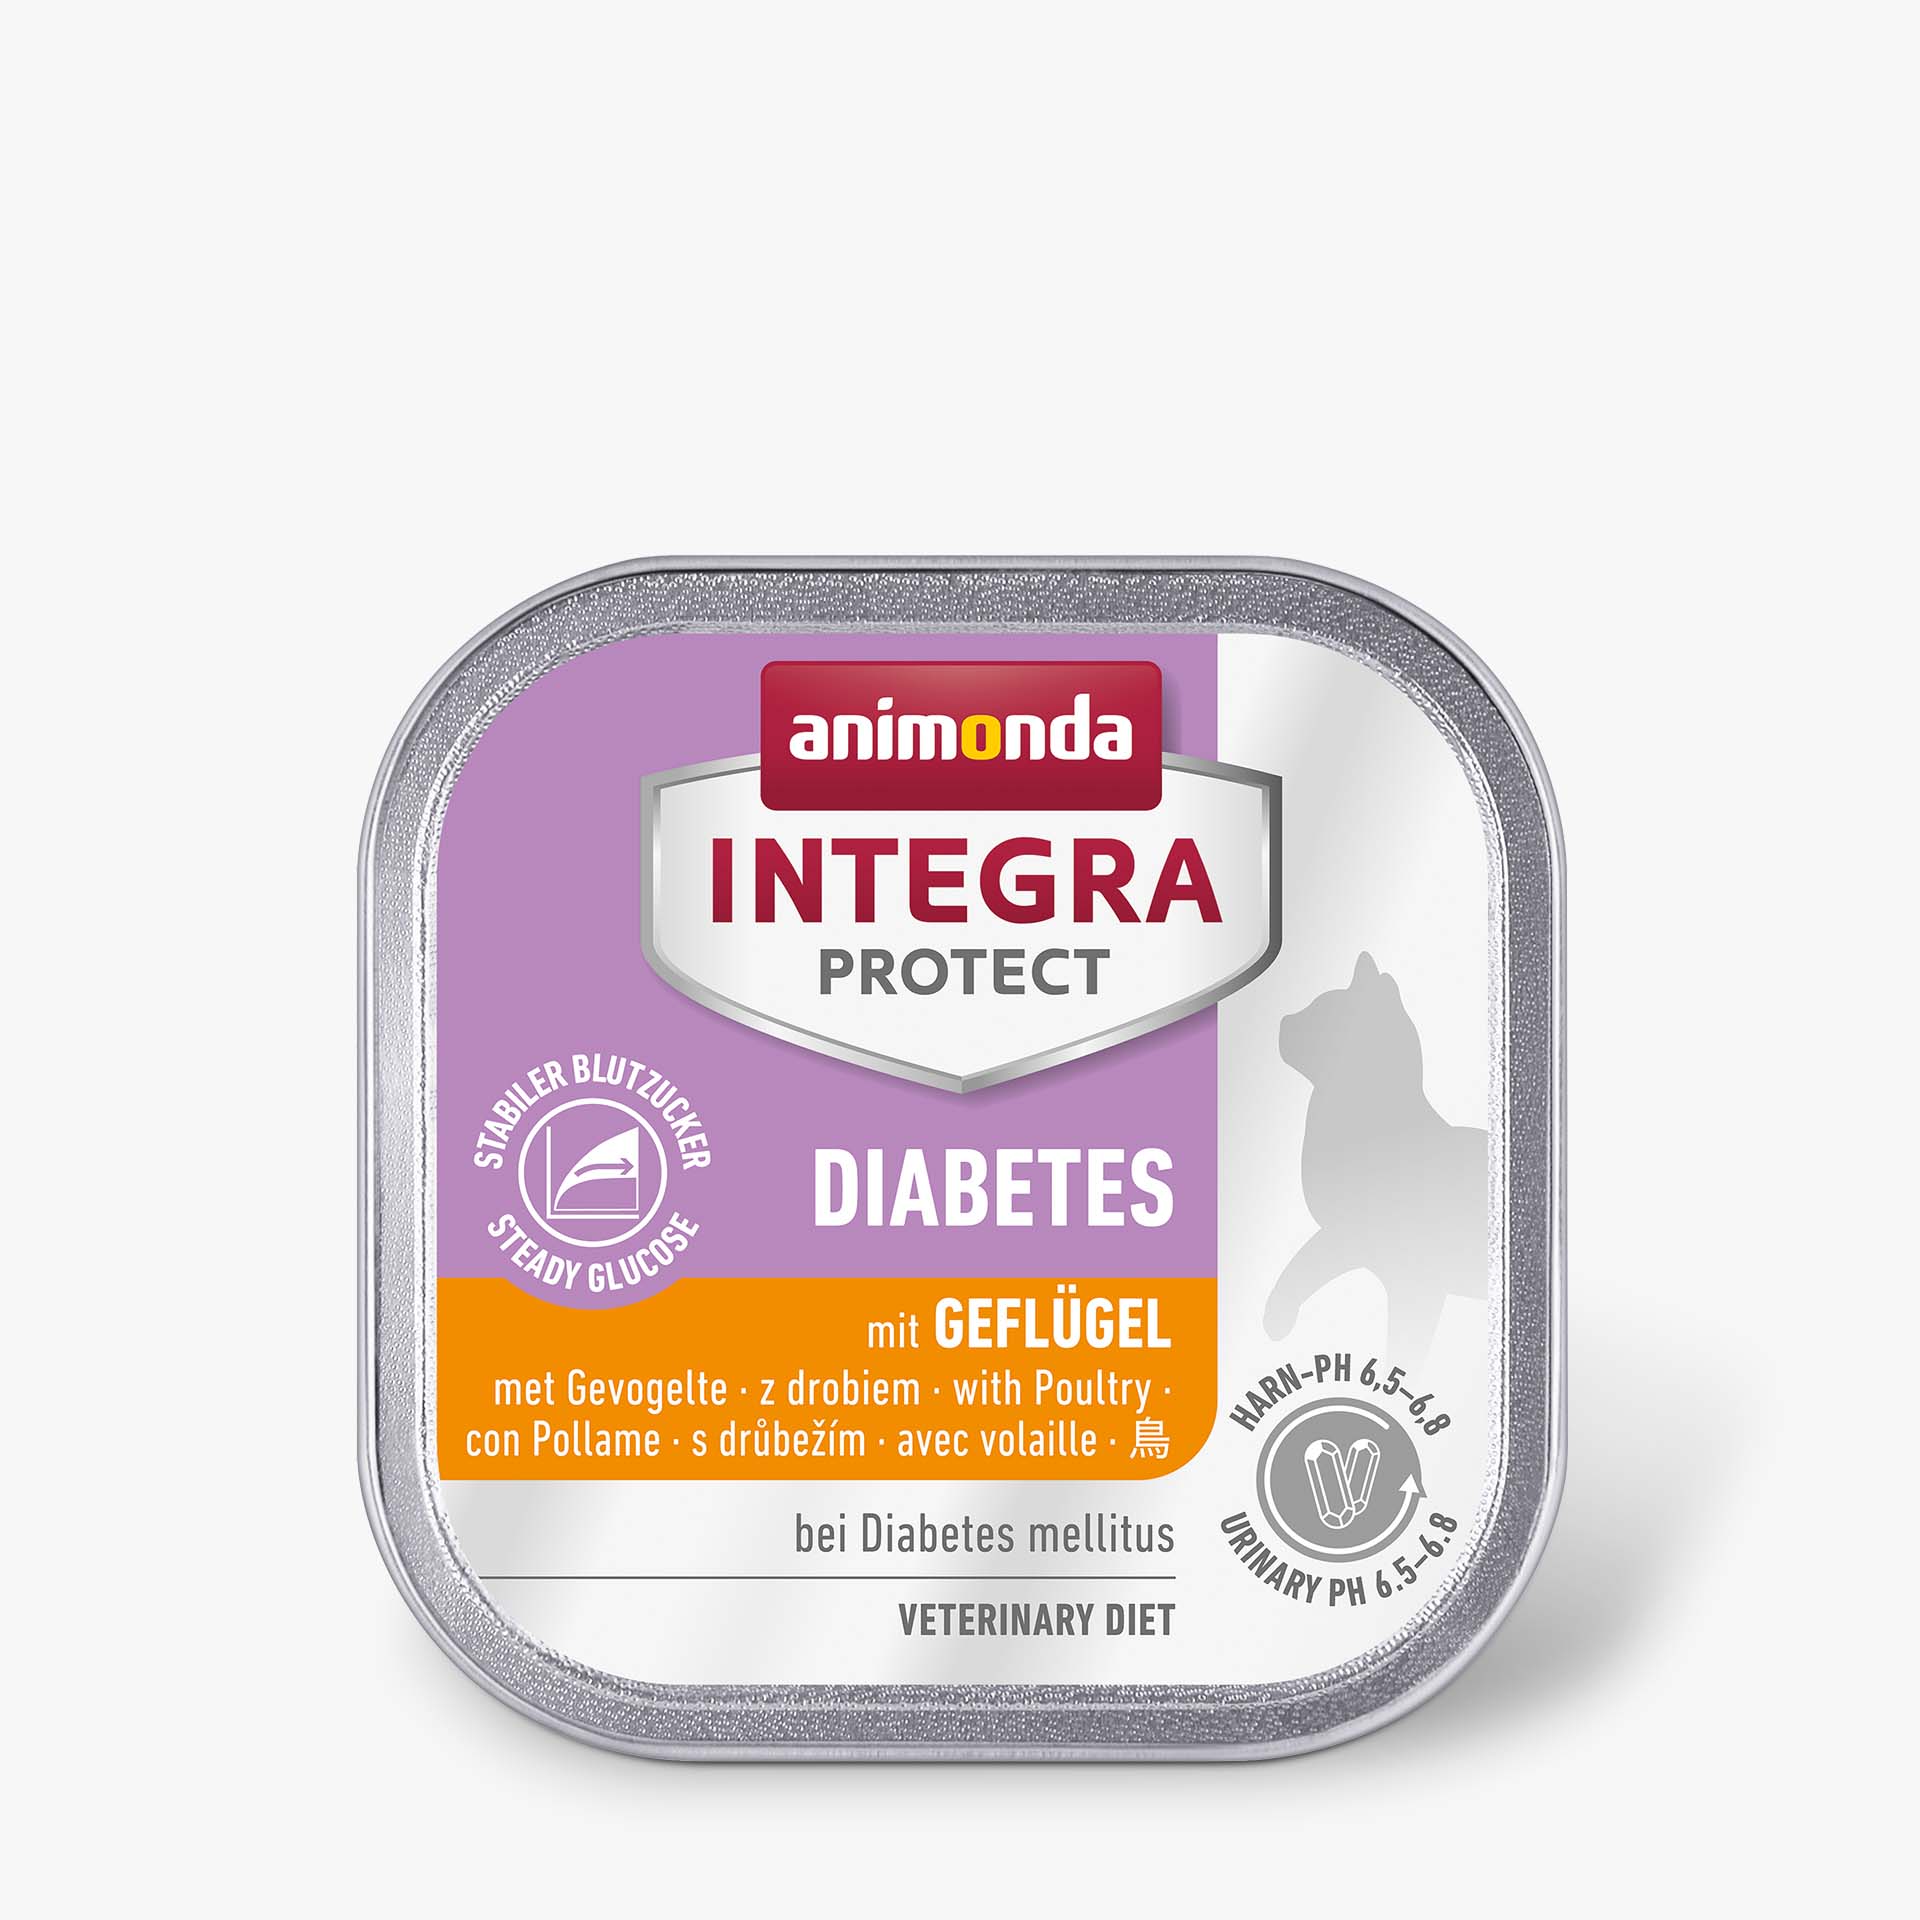 INTEGRA PROTECT with Poultry Diabetes